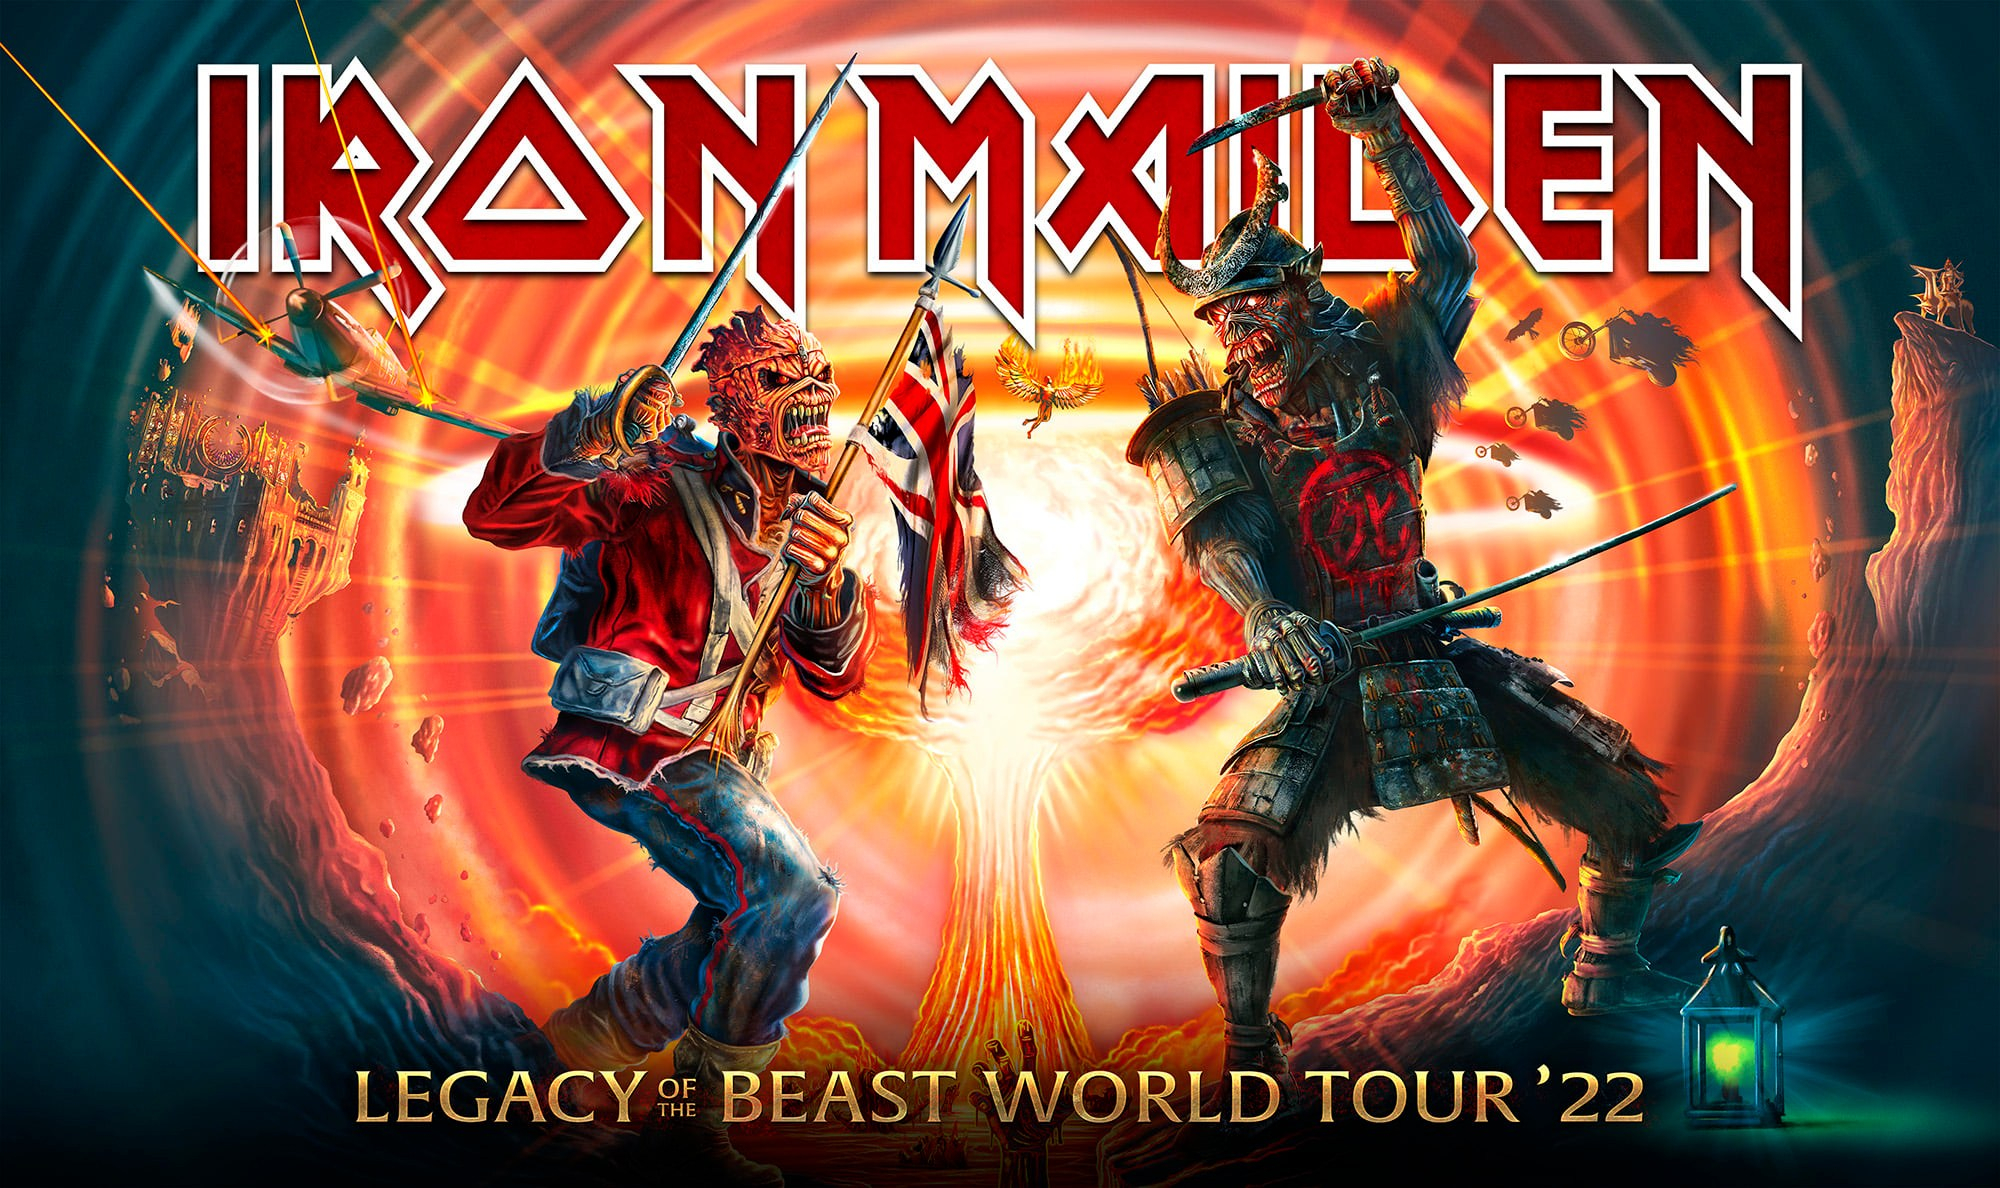 Cover: Iron Maiden Official Facebook Page